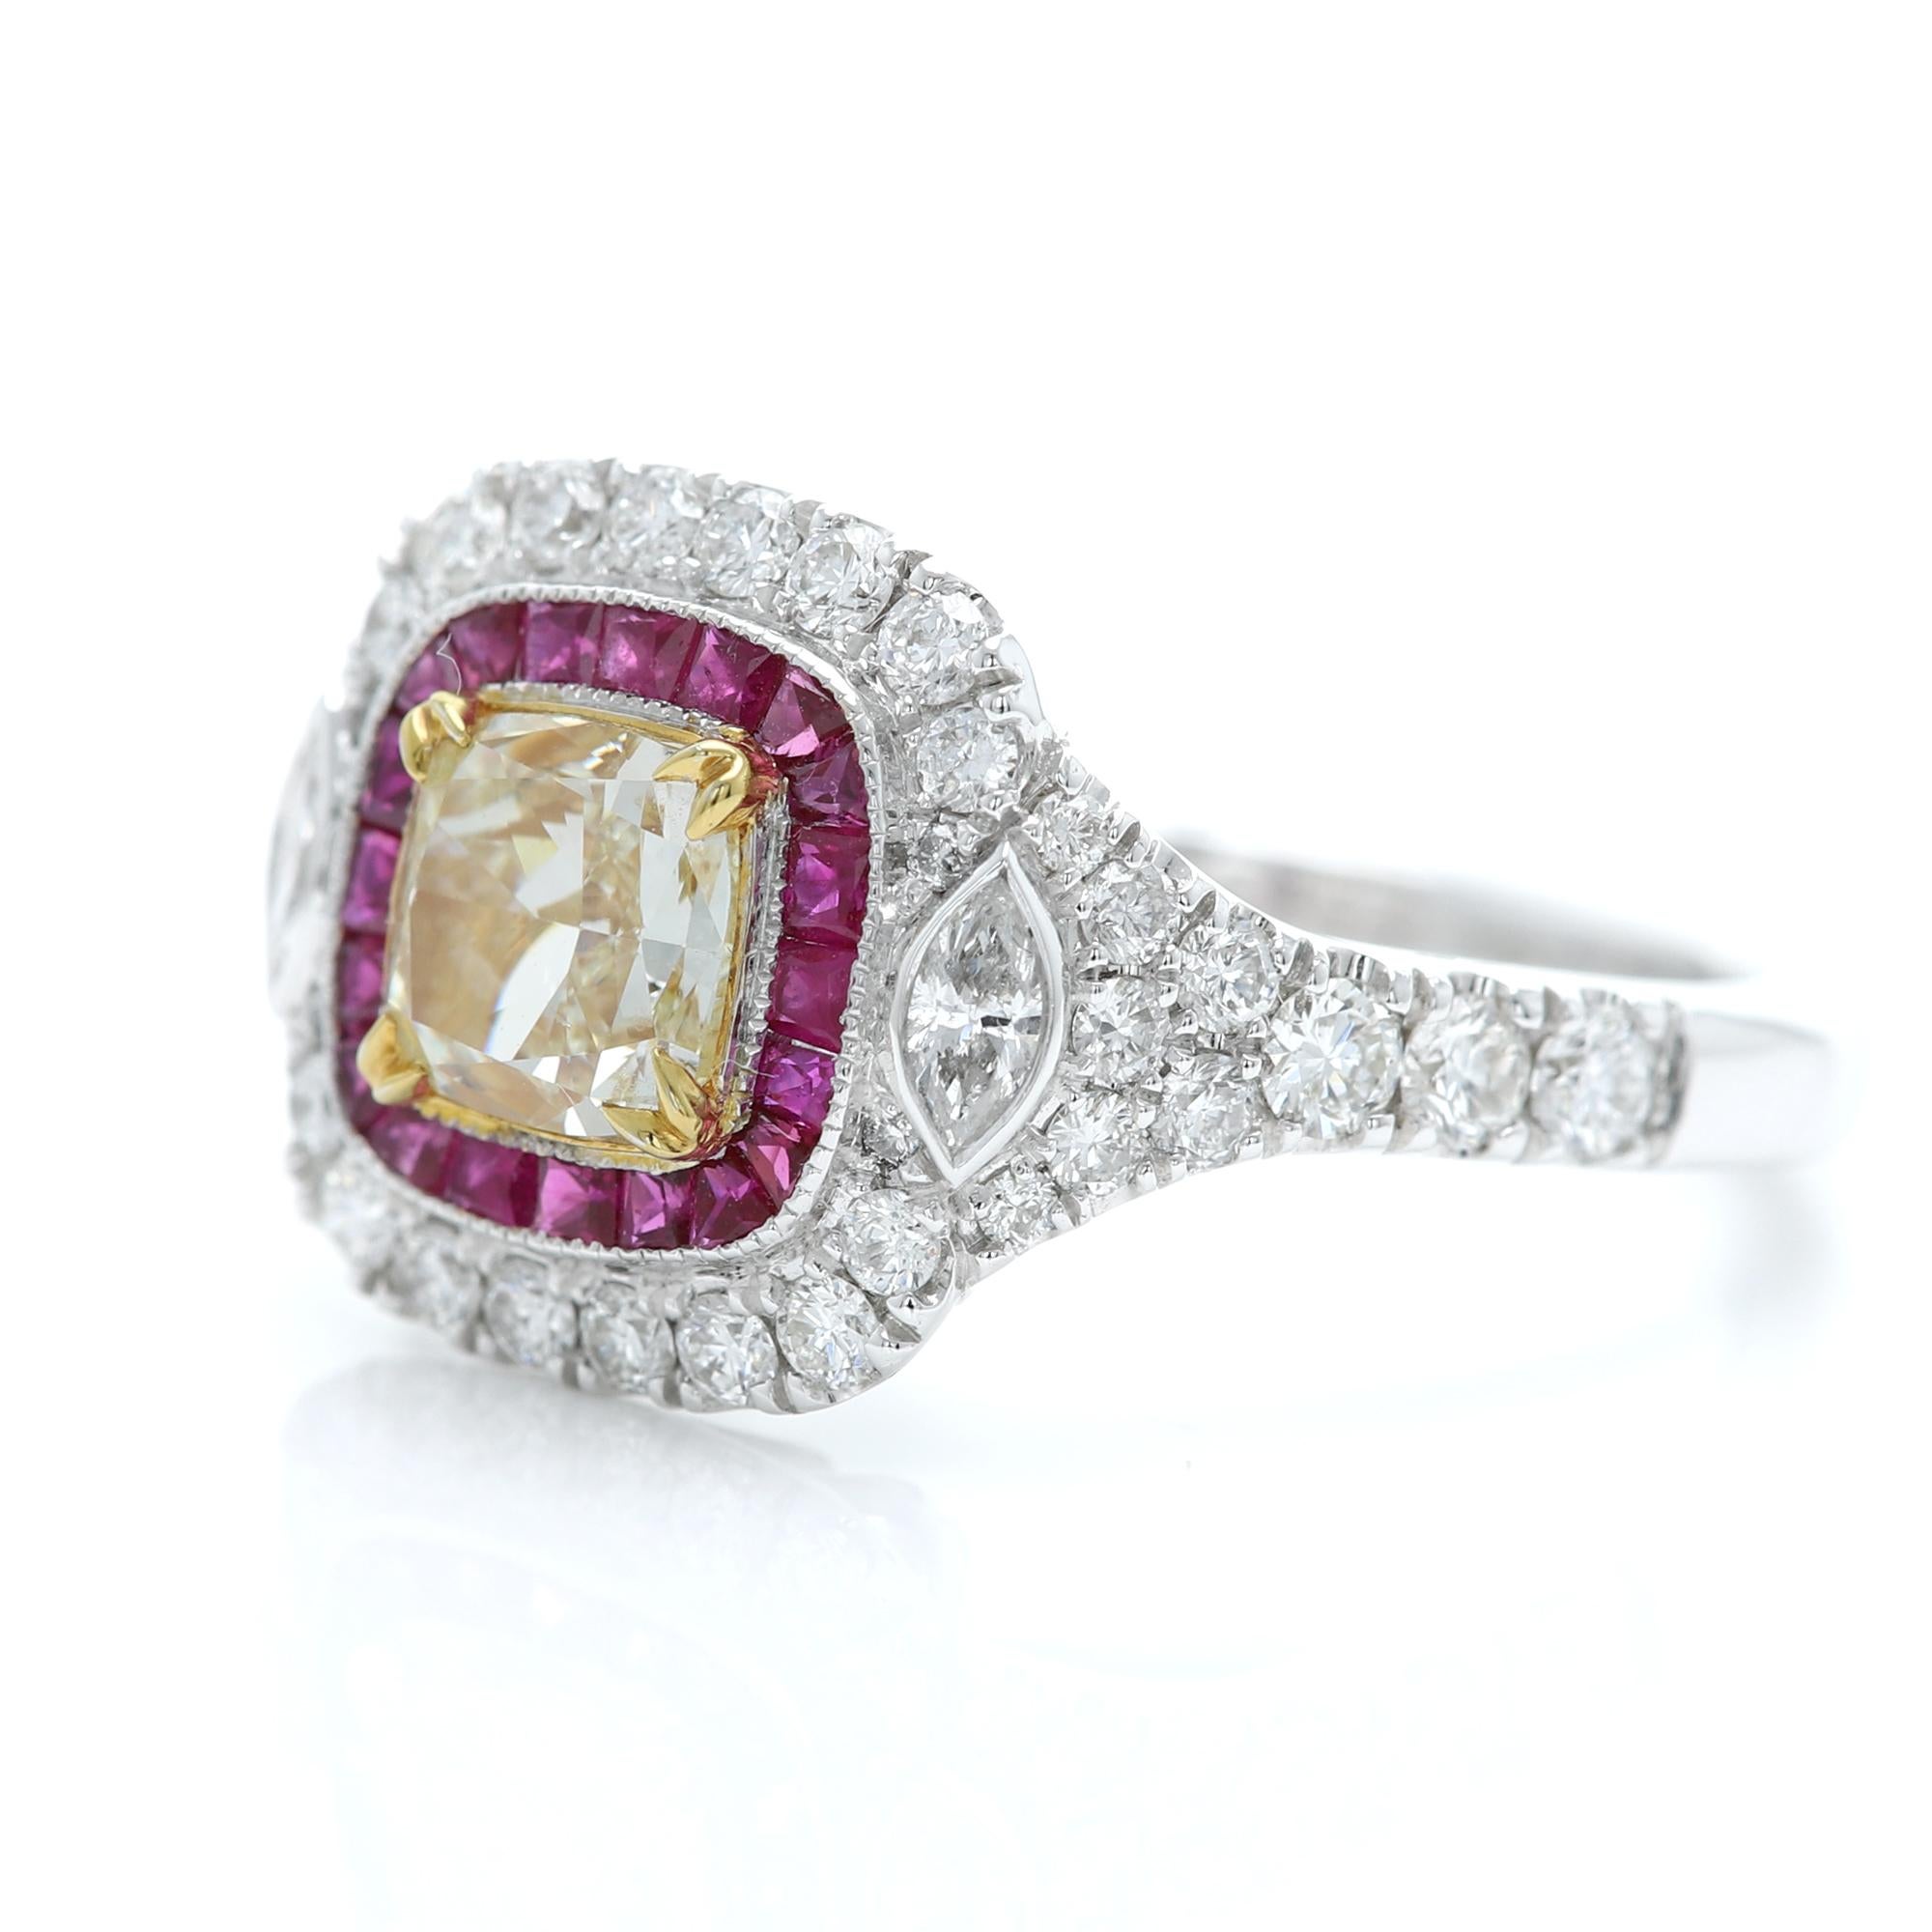 Art Deco Style & Bold Statement Colorful Ring
Center is Yellow Diamond surrounded with Red Ruby, sides have regular white Diamonds
All stones are Natural
18k Two Tone Gold 
Yellow Diamond size - 1.17 carat (6x6 mm) -SI
Small Diamonds 0.93 carat